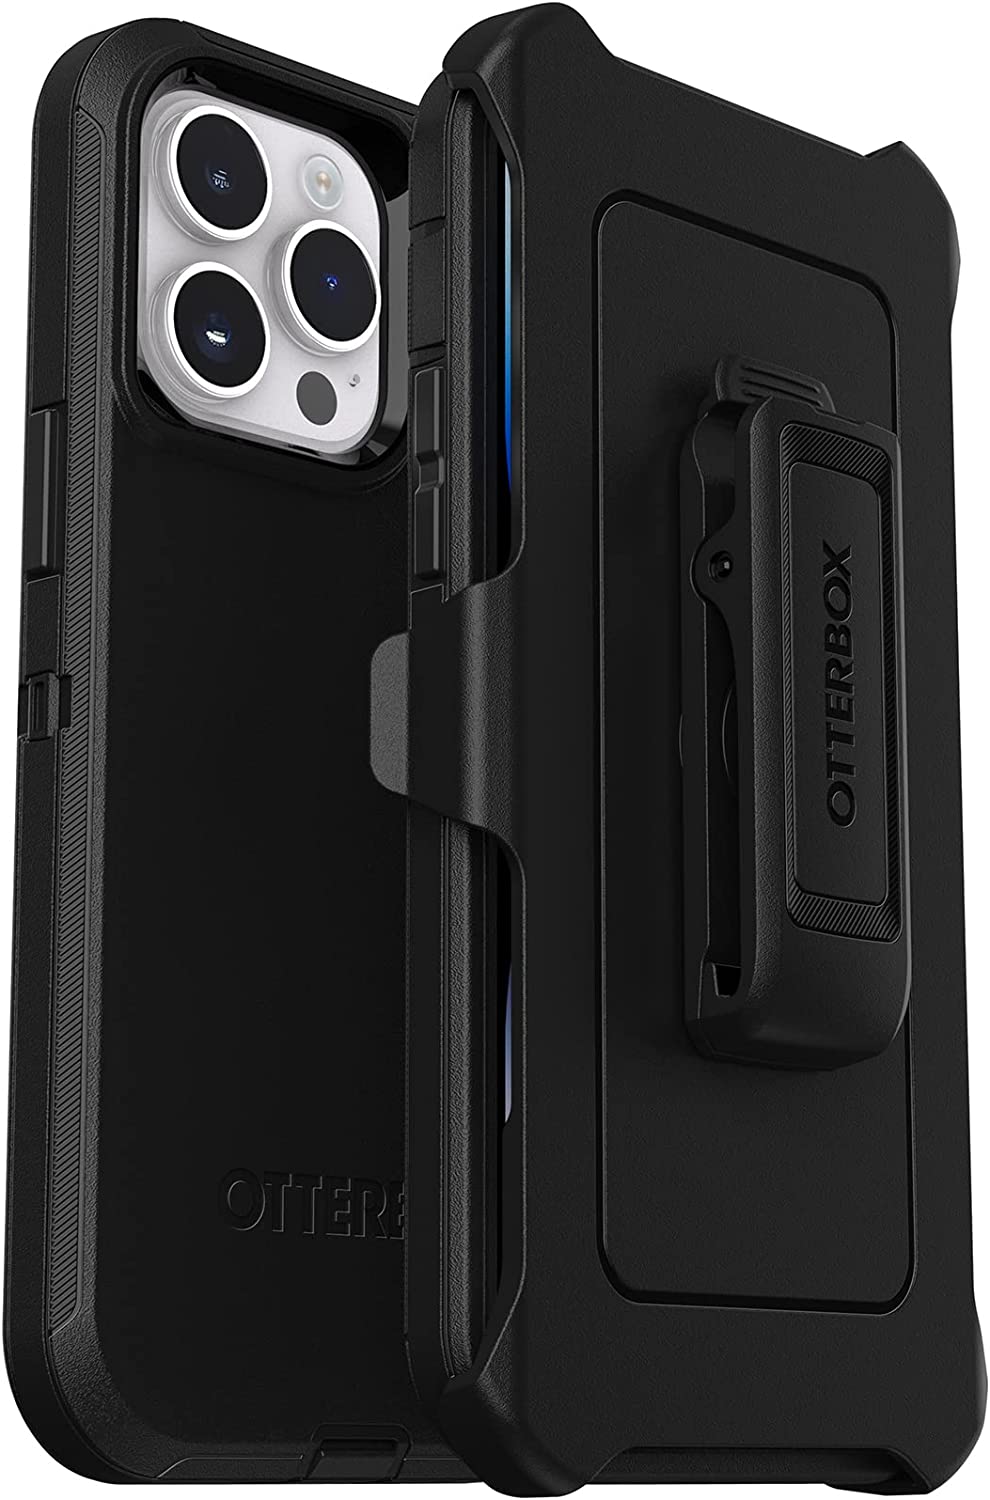 OtterBox DEFENDER SERIES Case for Apple iPhone 14 Pro Max - Black (Certified Refurbished)